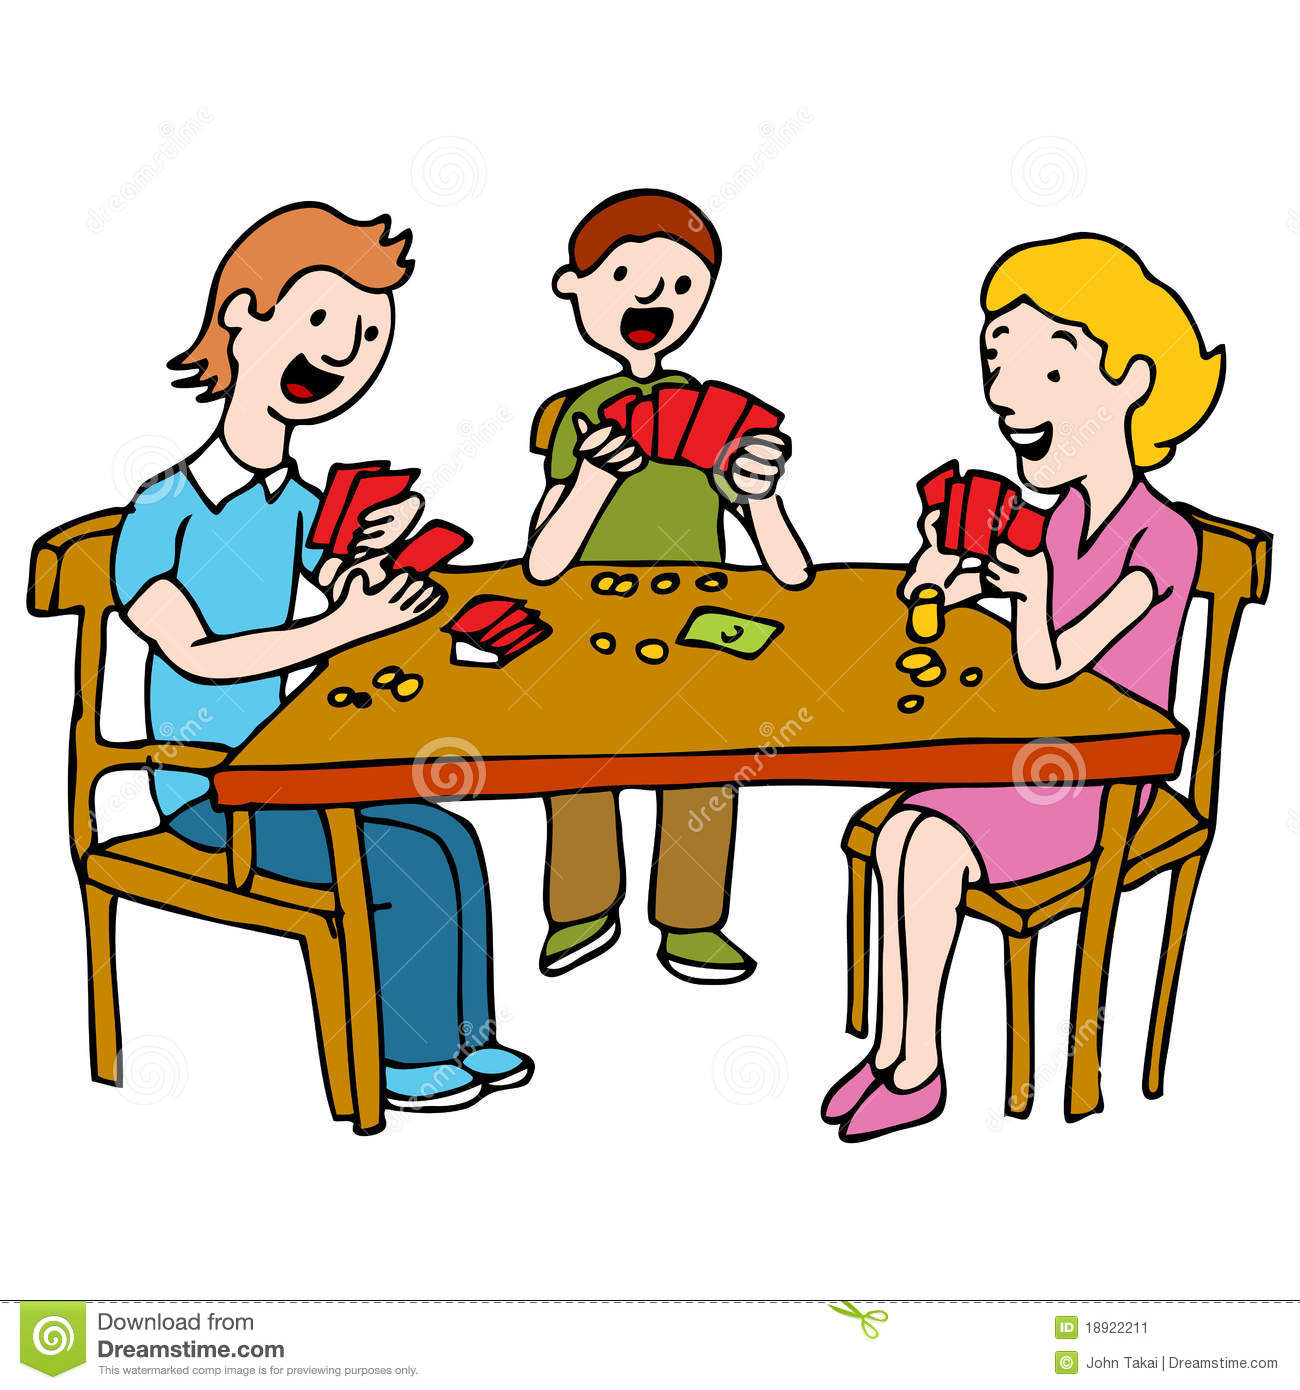 More Similar Stock Images Of   People Playing Poker Card Game